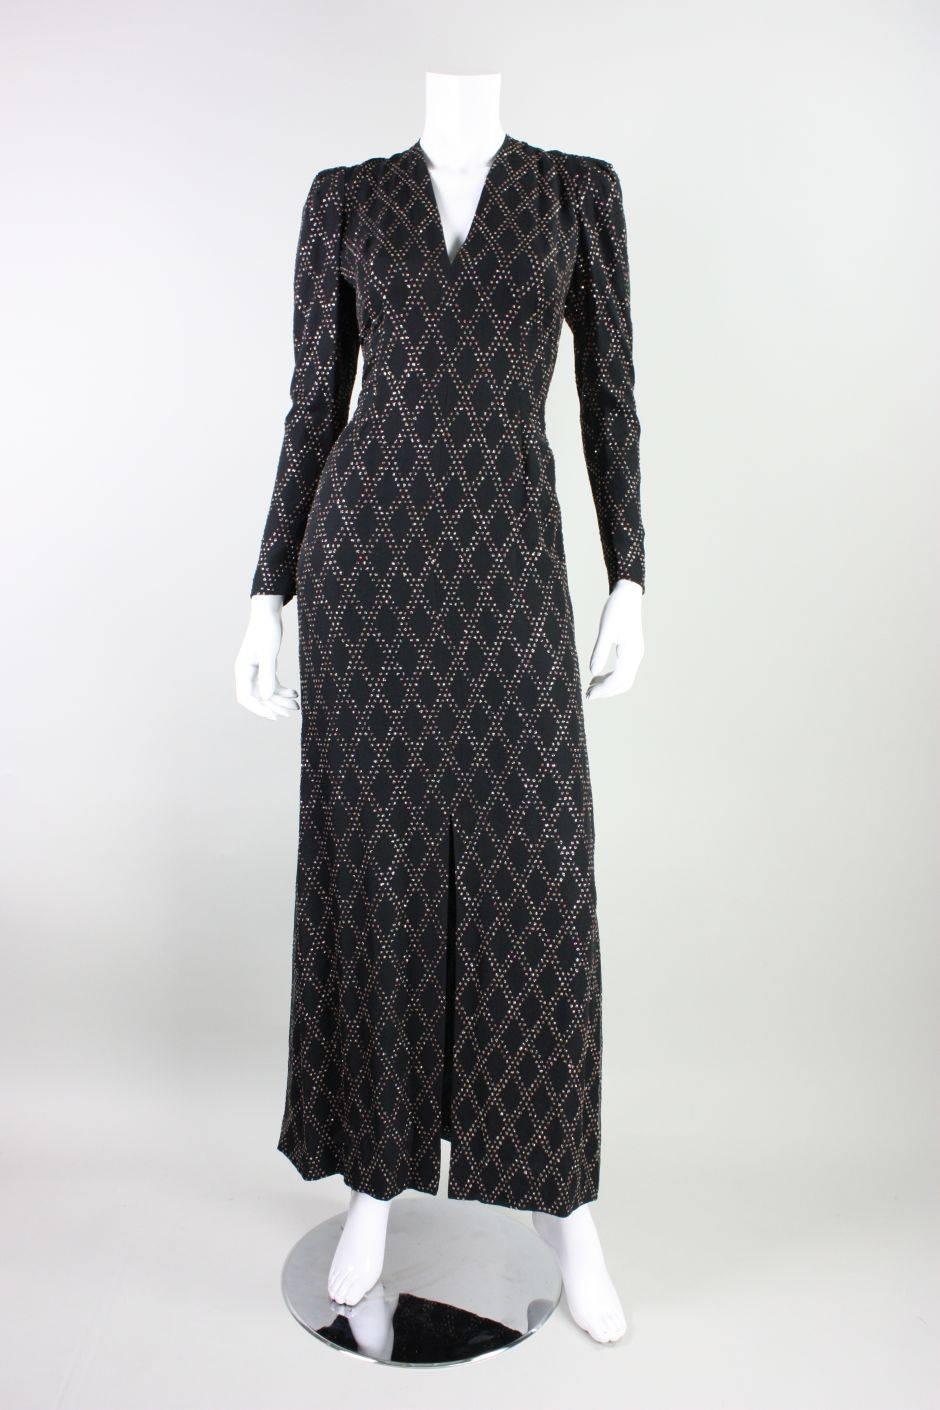 Vintage custom-made gown dates to the 1970's and is made of black silk chiffon with silver & pink glitter glued on in a diamond pattern. Slit v-neck.  Long sleeves with double snap cuff have pintucking along armhole, which results in light volume in